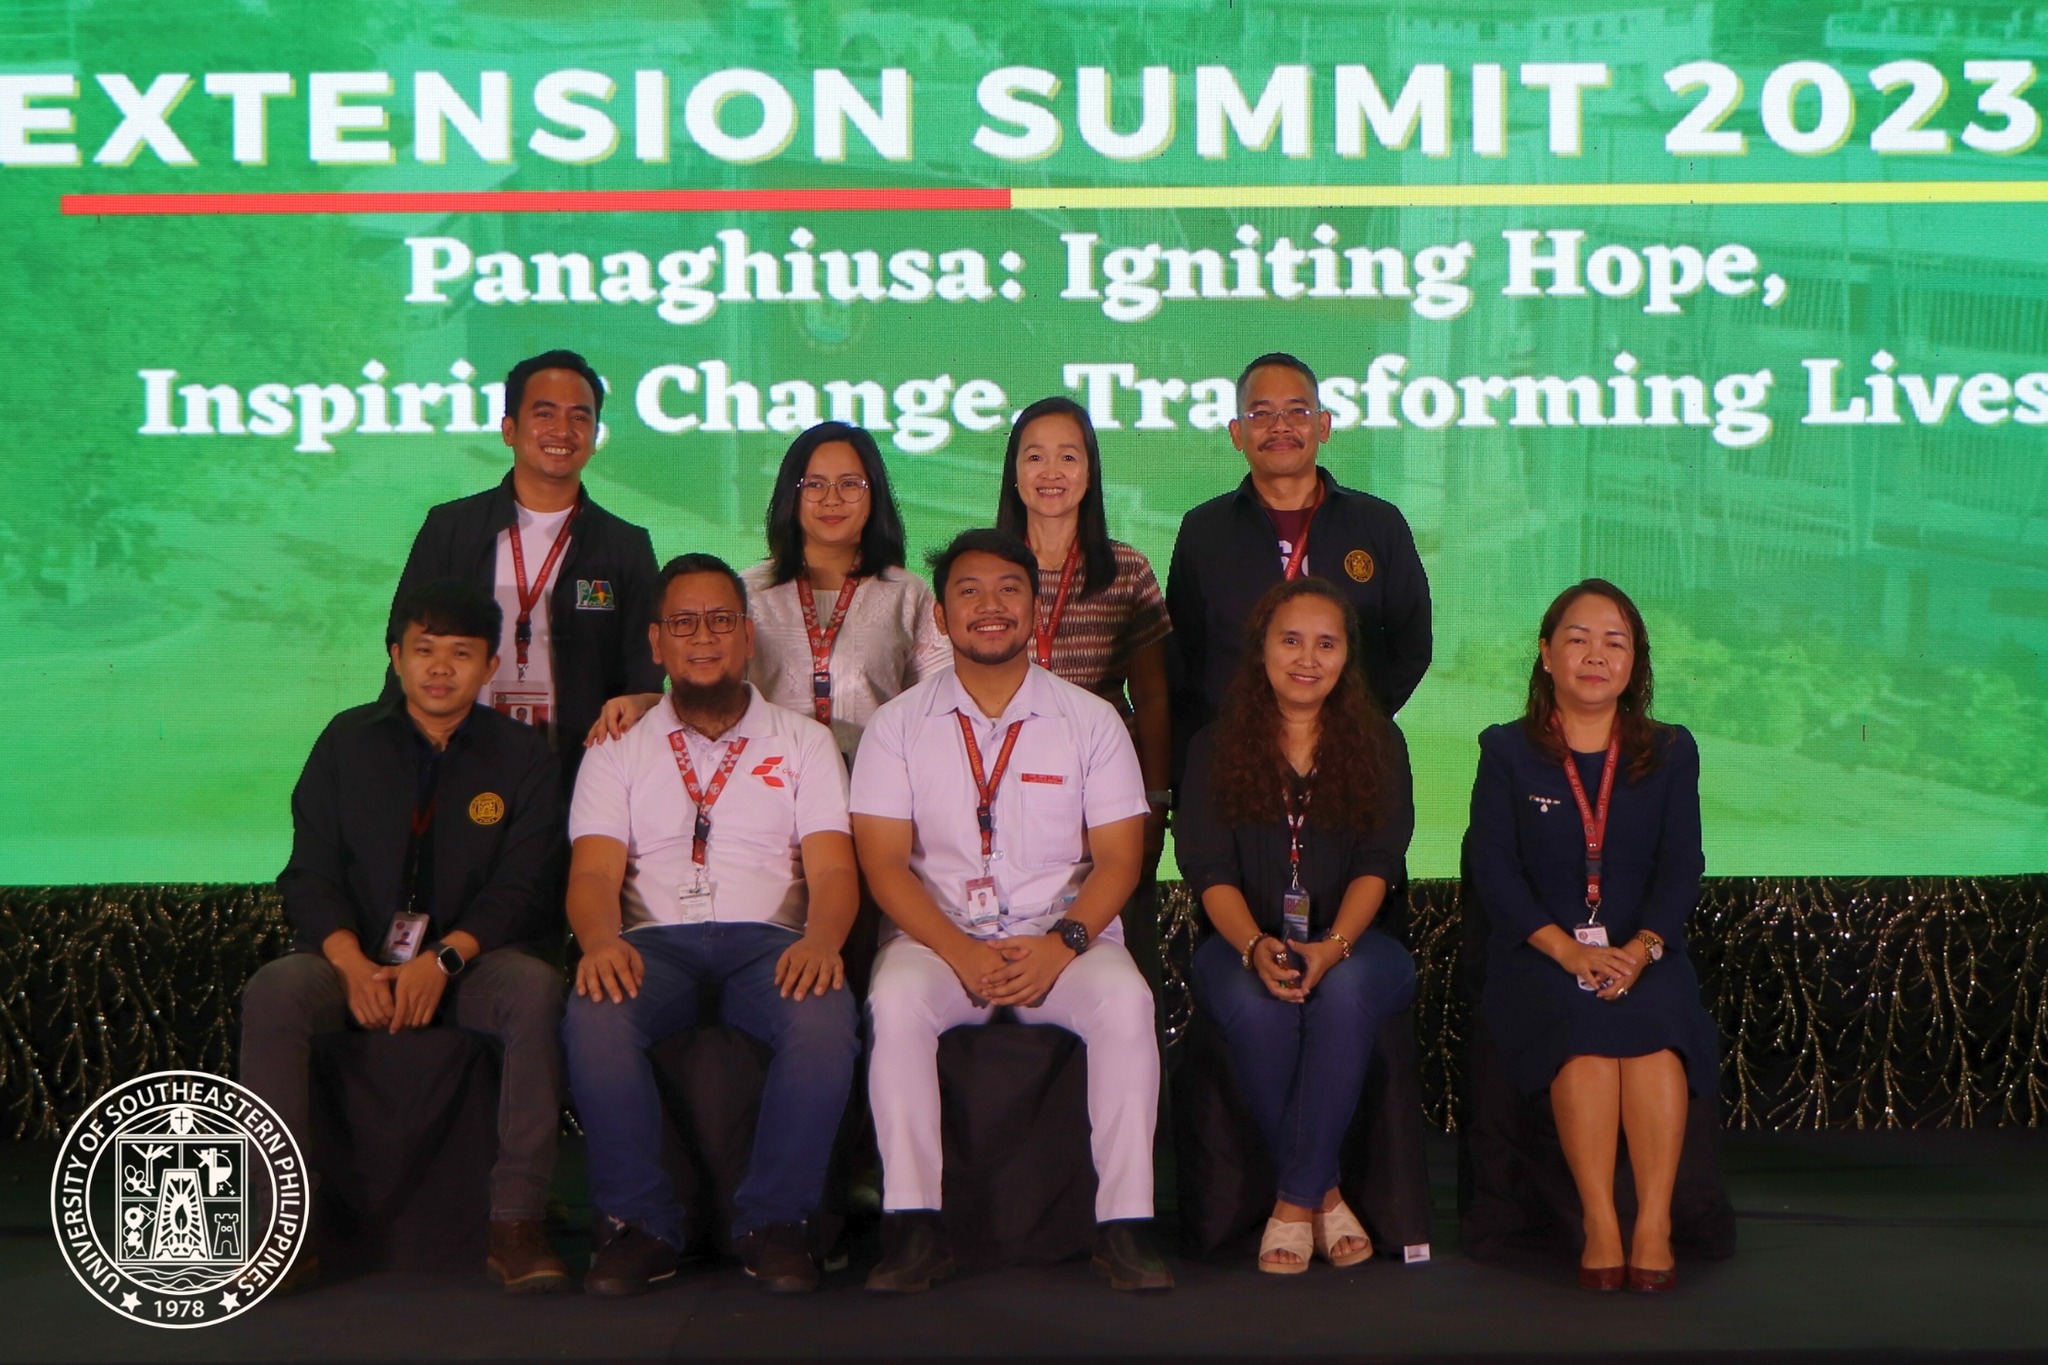 [𝗨𝗦𝗲𝗣 𝗘𝗫𝗧𝗘𝗡𝗦𝗜𝗢𝗡 𝗦𝗨𝗠𝗠𝗜𝗧 𝟮𝟬𝟮𝟯] Day 2 of 2 of the University of Southeastern Philippines (USeP) Extension Summit 2023